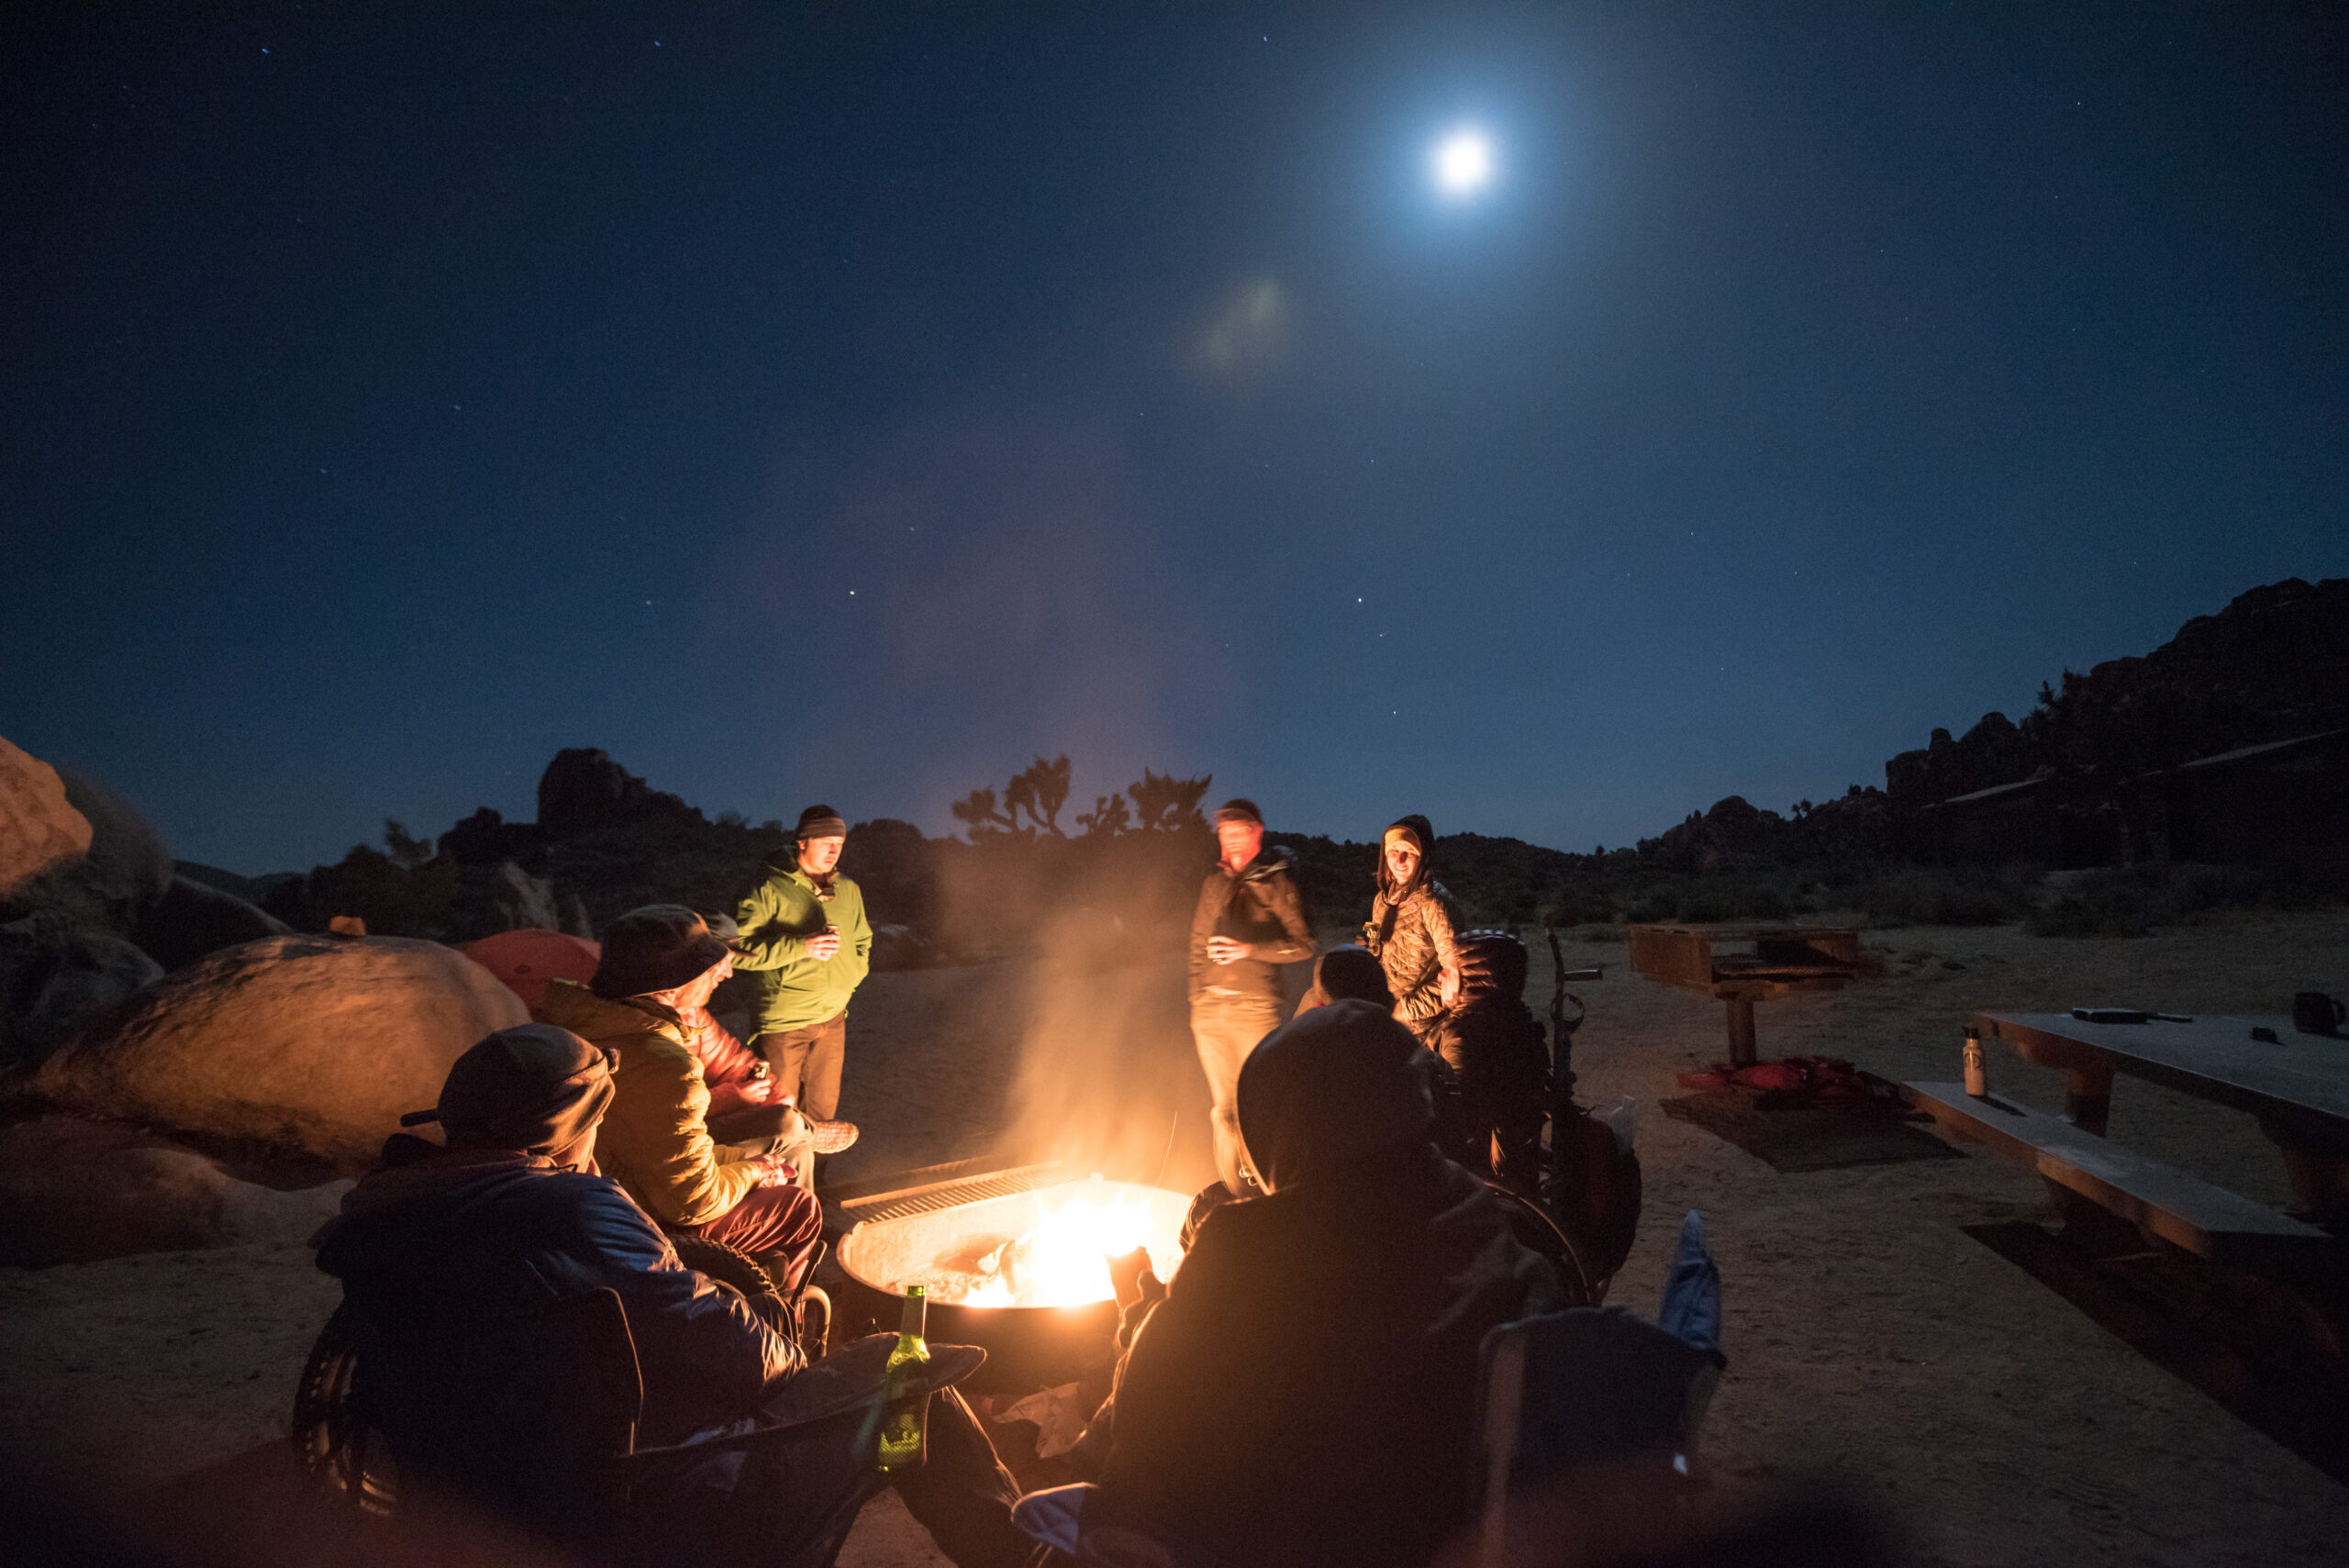 A night picture of a group of climbers sitting around a fire in Joshua Tree. The sky is dark and you can see some stars in the sky. Everyone is in jackets and hats.